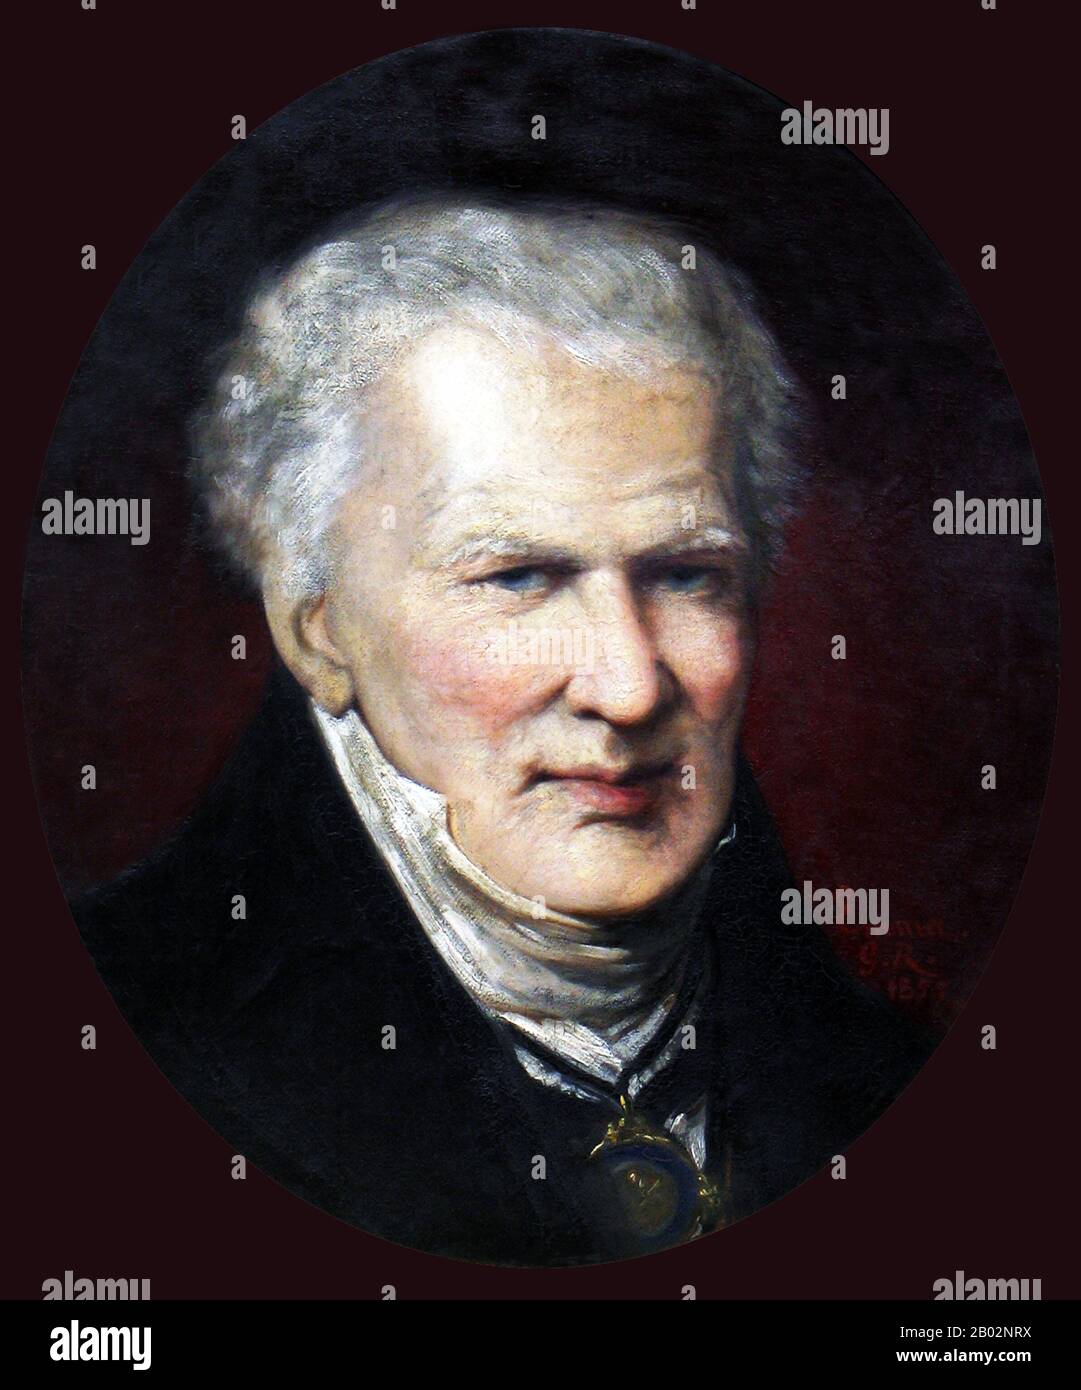 Friedrich Wilhelm Heinrich Alexander von Humboldt was a Prussian geographer, naturalist, and explorer, and the younger brother of the Prussian minister, philosopher and linguist Wilhelm von Humboldt (1767–1835). Humboldt's quantitative work on botanical geography laid the foundation for the field of biogeography.  Between 1799 and 1804, Humboldt travelled extensively in Latin America, exploring and describing it for the first time from a modern scientific point of view. His description of the journey was written up and published in an enormous set of volumes over 21 years. He was one of the fi Stock Photo